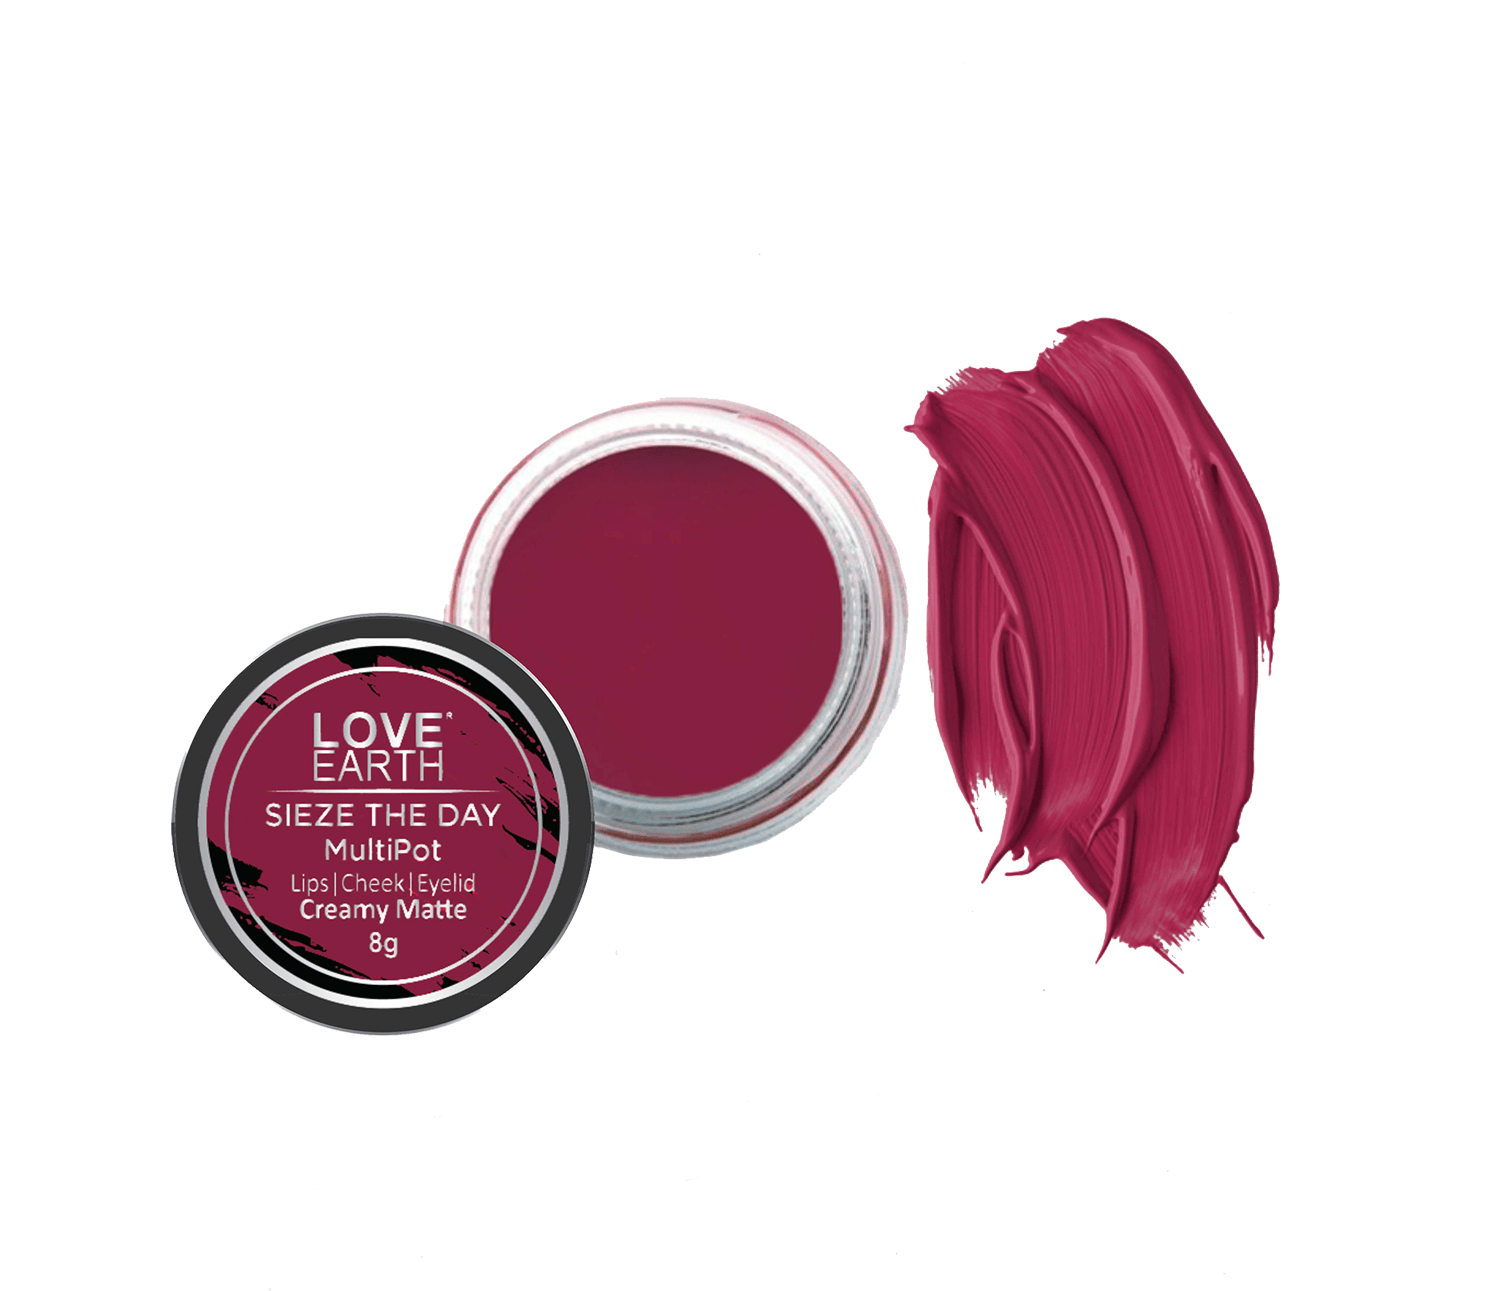 LOVE EARTH | Love Earth Lip Tint & Cheek Tint Multipot-Seize The Day With Richness Of Essential Oils And Vitamin E For Lips, Eyelids & Cheeks, Matte Finish - Raspberry Pink